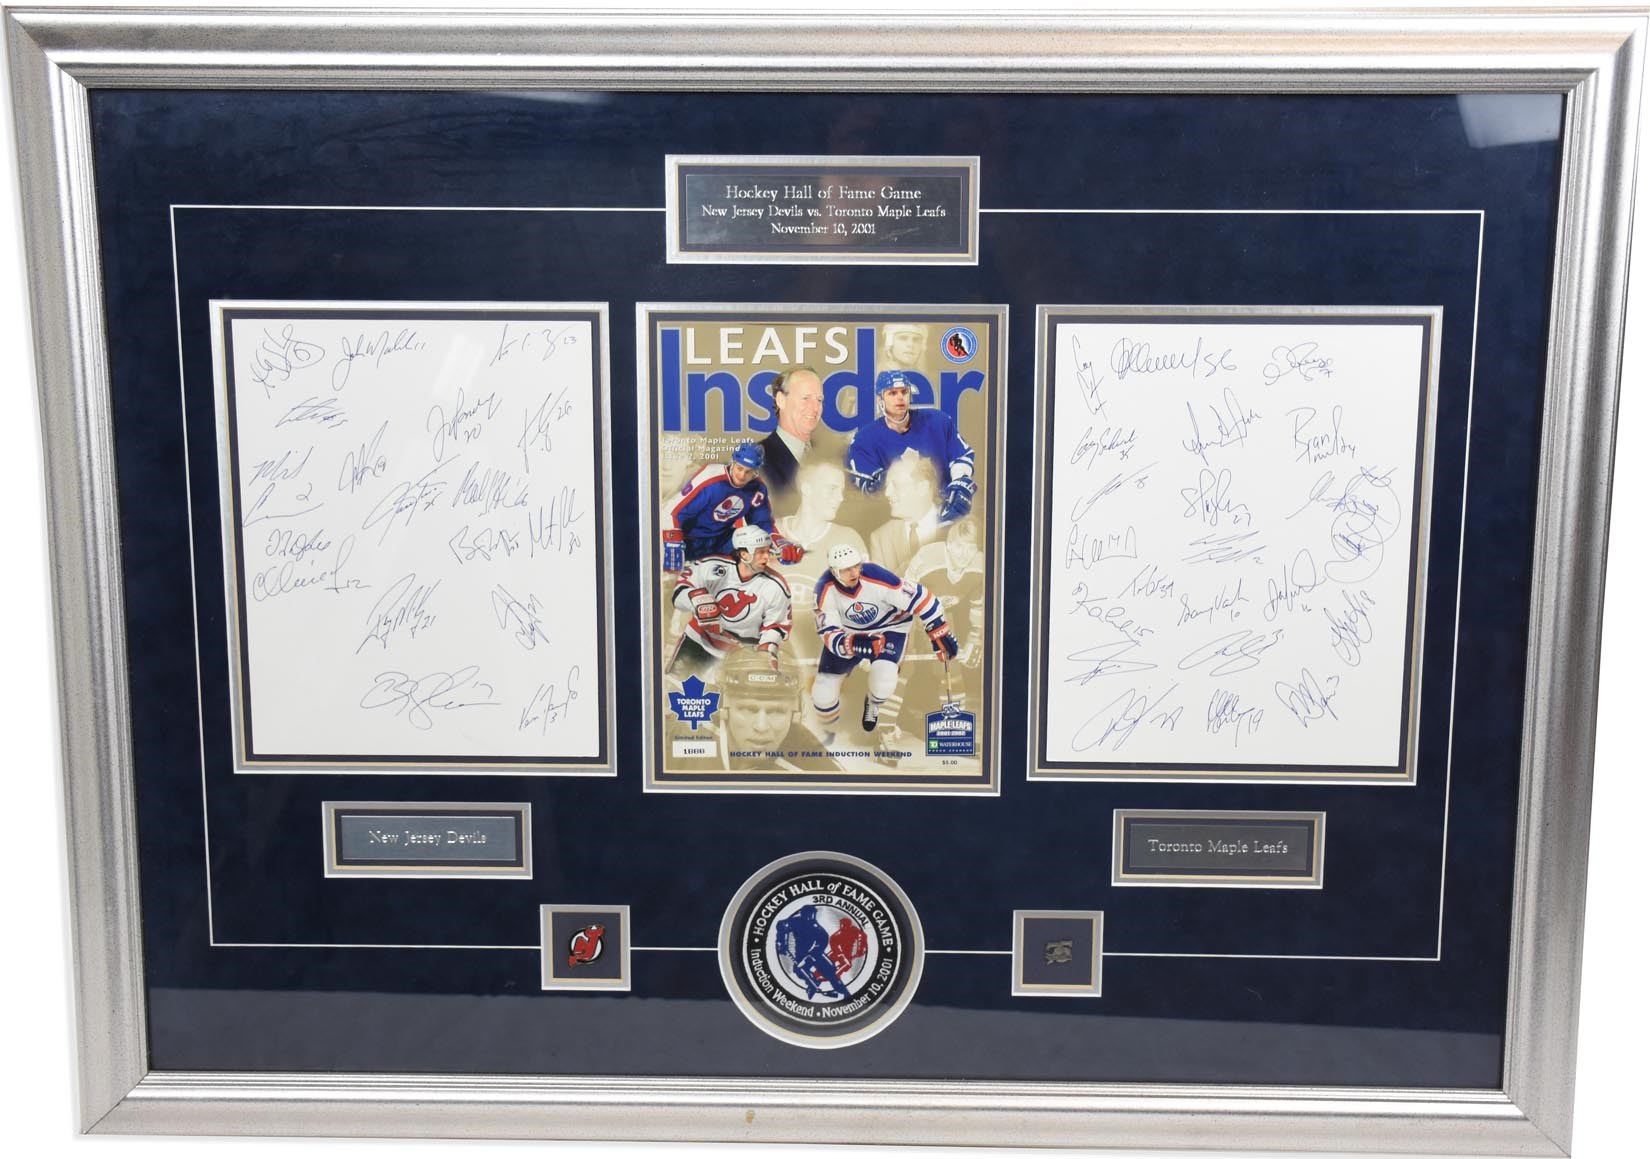 - 2001 Hockey Hall of Fame Game Signed Display Presented to Craig Patrick